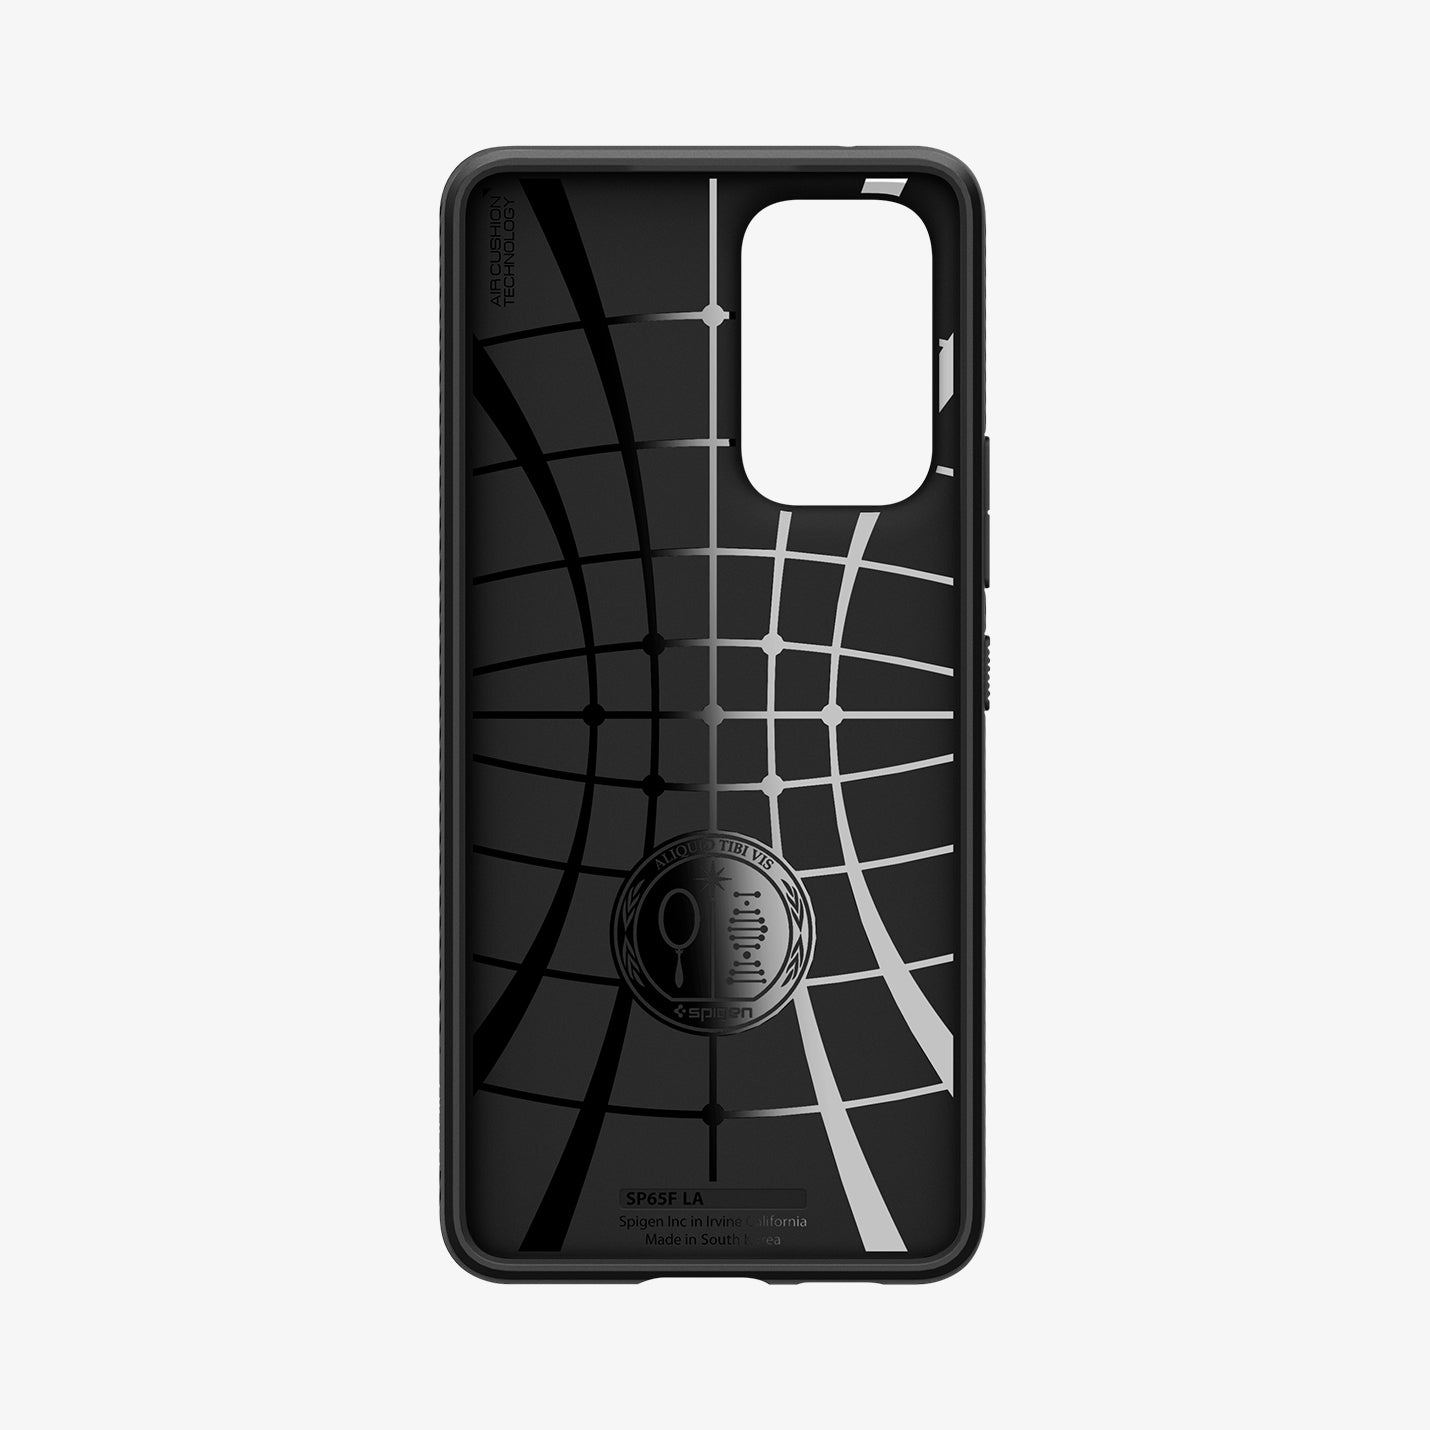 ACS04258 - Galaxy A53 5G Case Liquid Air in Matte Black showing the inner case with spider web pattern